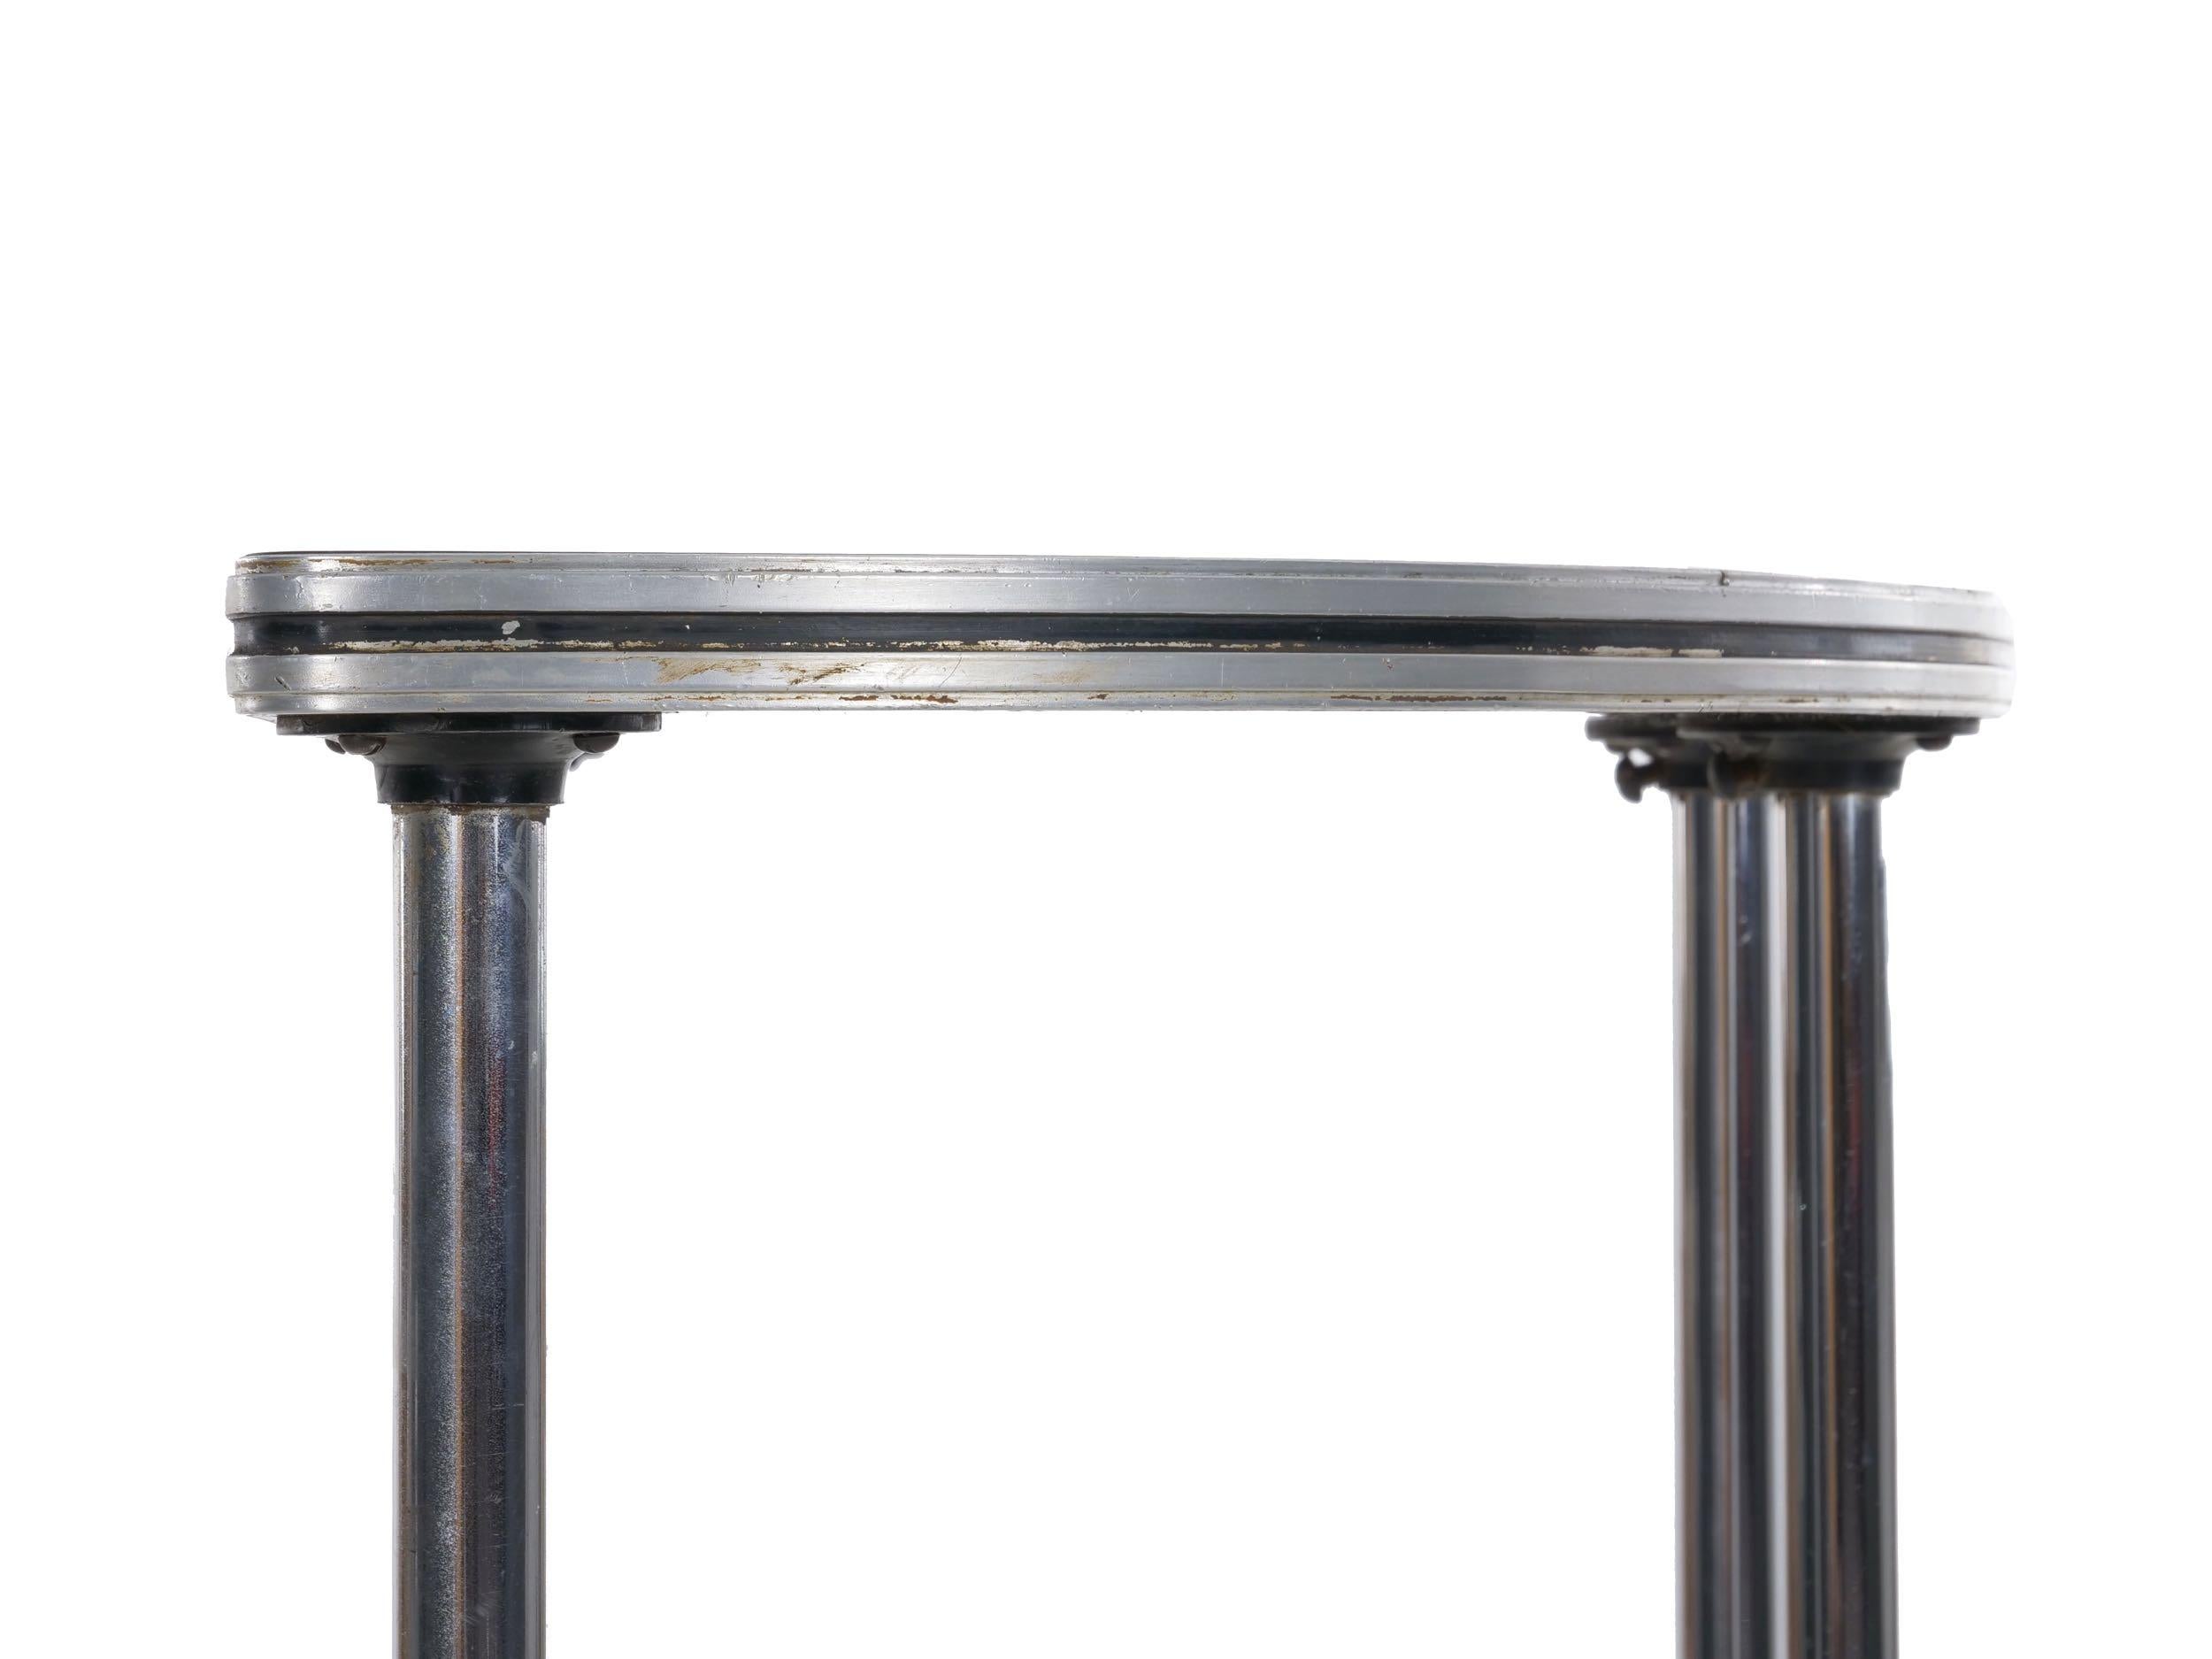 20th Century Art Deco Chrome and Black Lacquer Demilune Side Table by Royalchrome circa 1930s